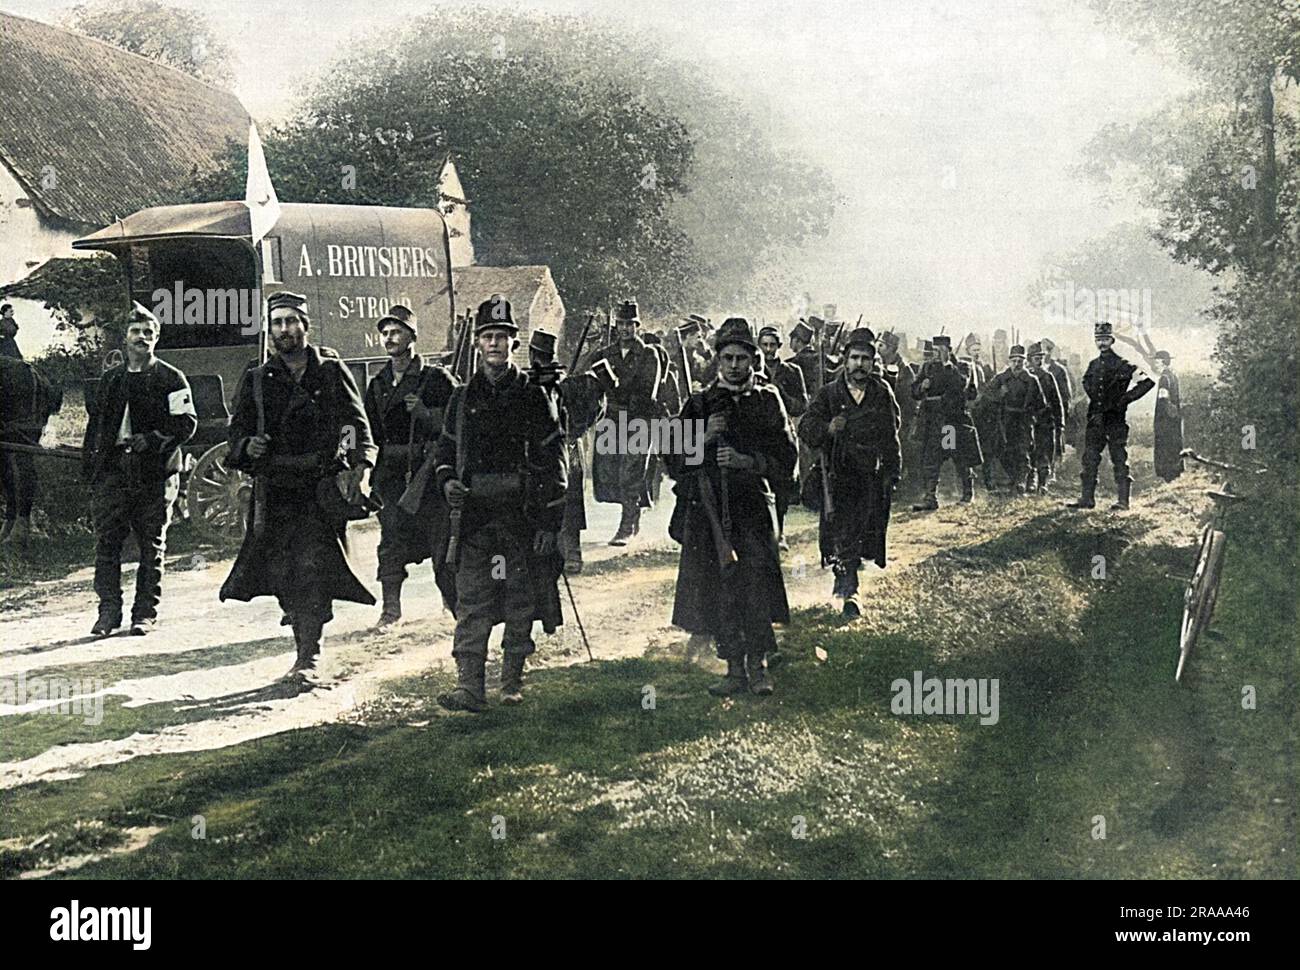 When Belgium was invaded at the start of World War I, it was lacking in fighting men, equipment and officers with experience of war. She had 110,000 men, exclusive of the garrisons at Liege and Namur, to guard the road to Brussels. These men, however, proceeded to the firing line, as seen in this photograph, with determination and eagerness.     Date: 1914 Stock Photo